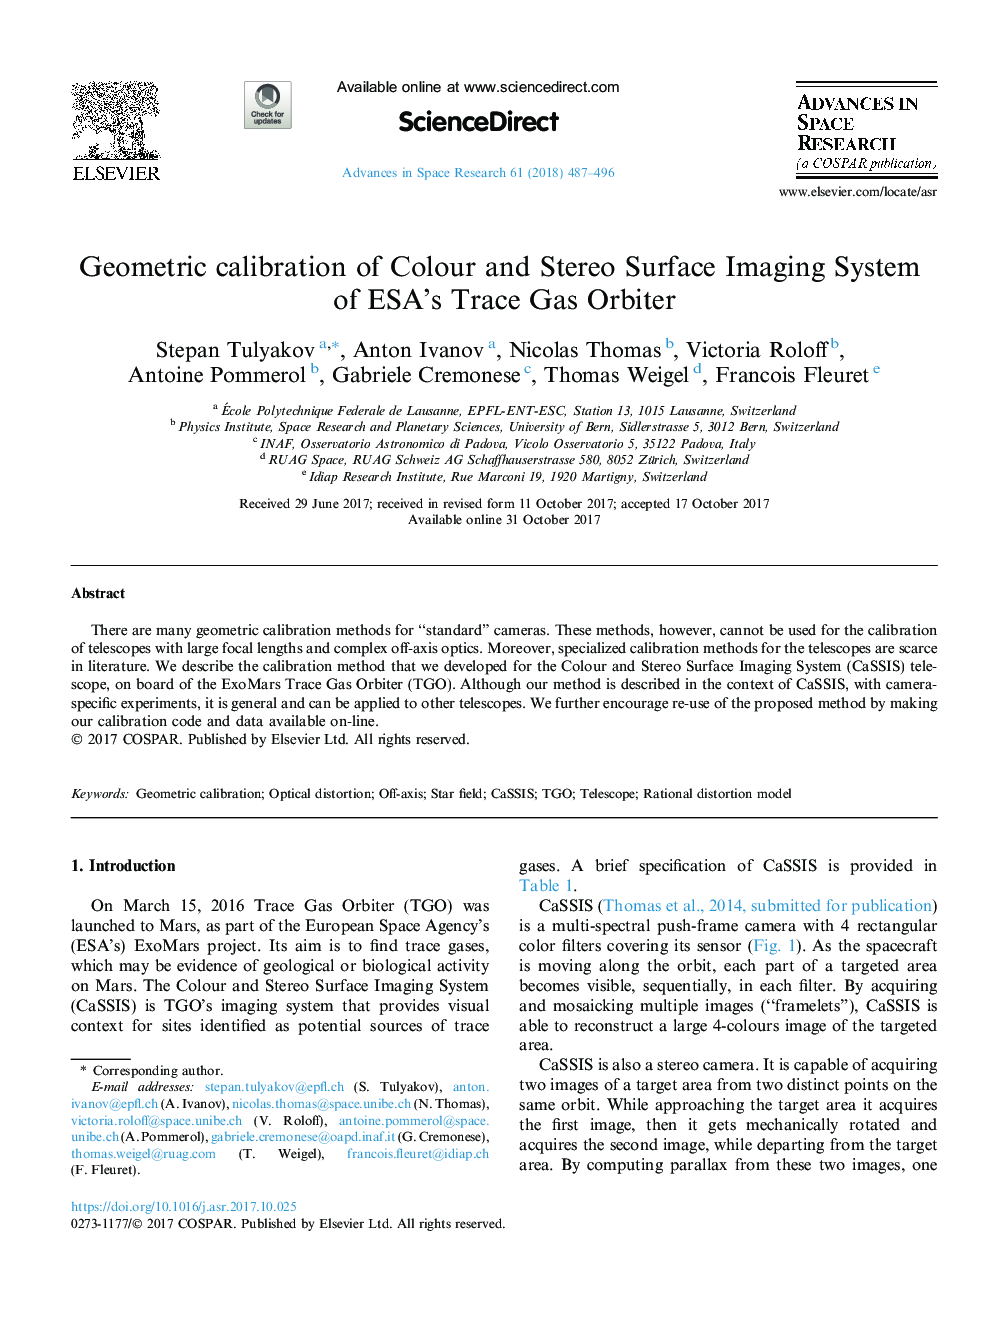 Geometric calibration of Colour and Stereo Surface Imaging System of ESA's Trace Gas Orbiter